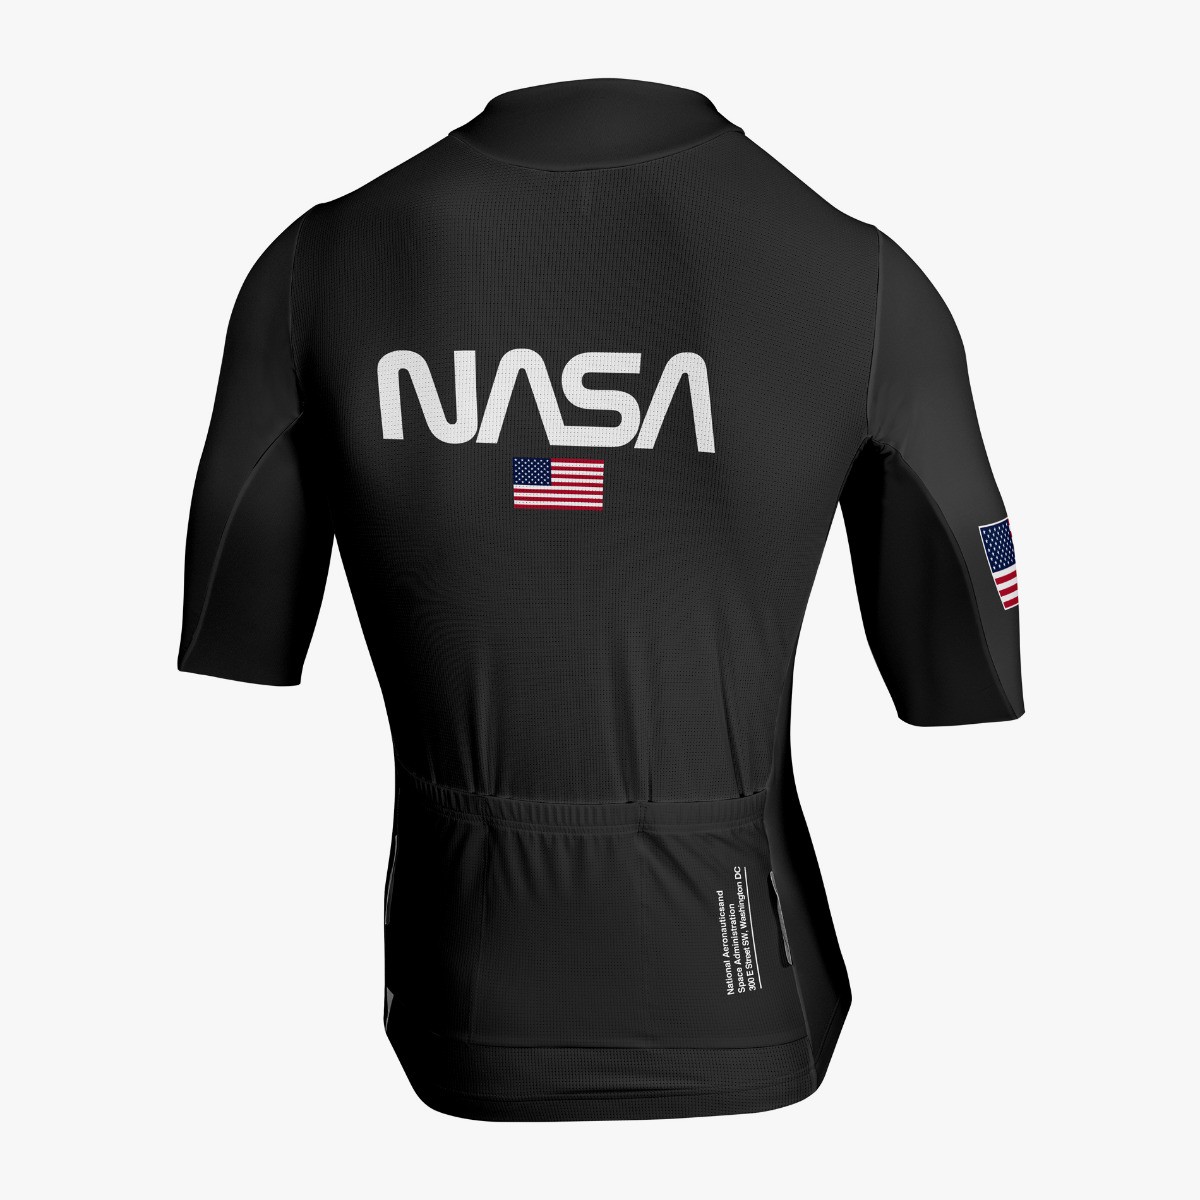 space agency collection cycling clothing jersey nasa 04